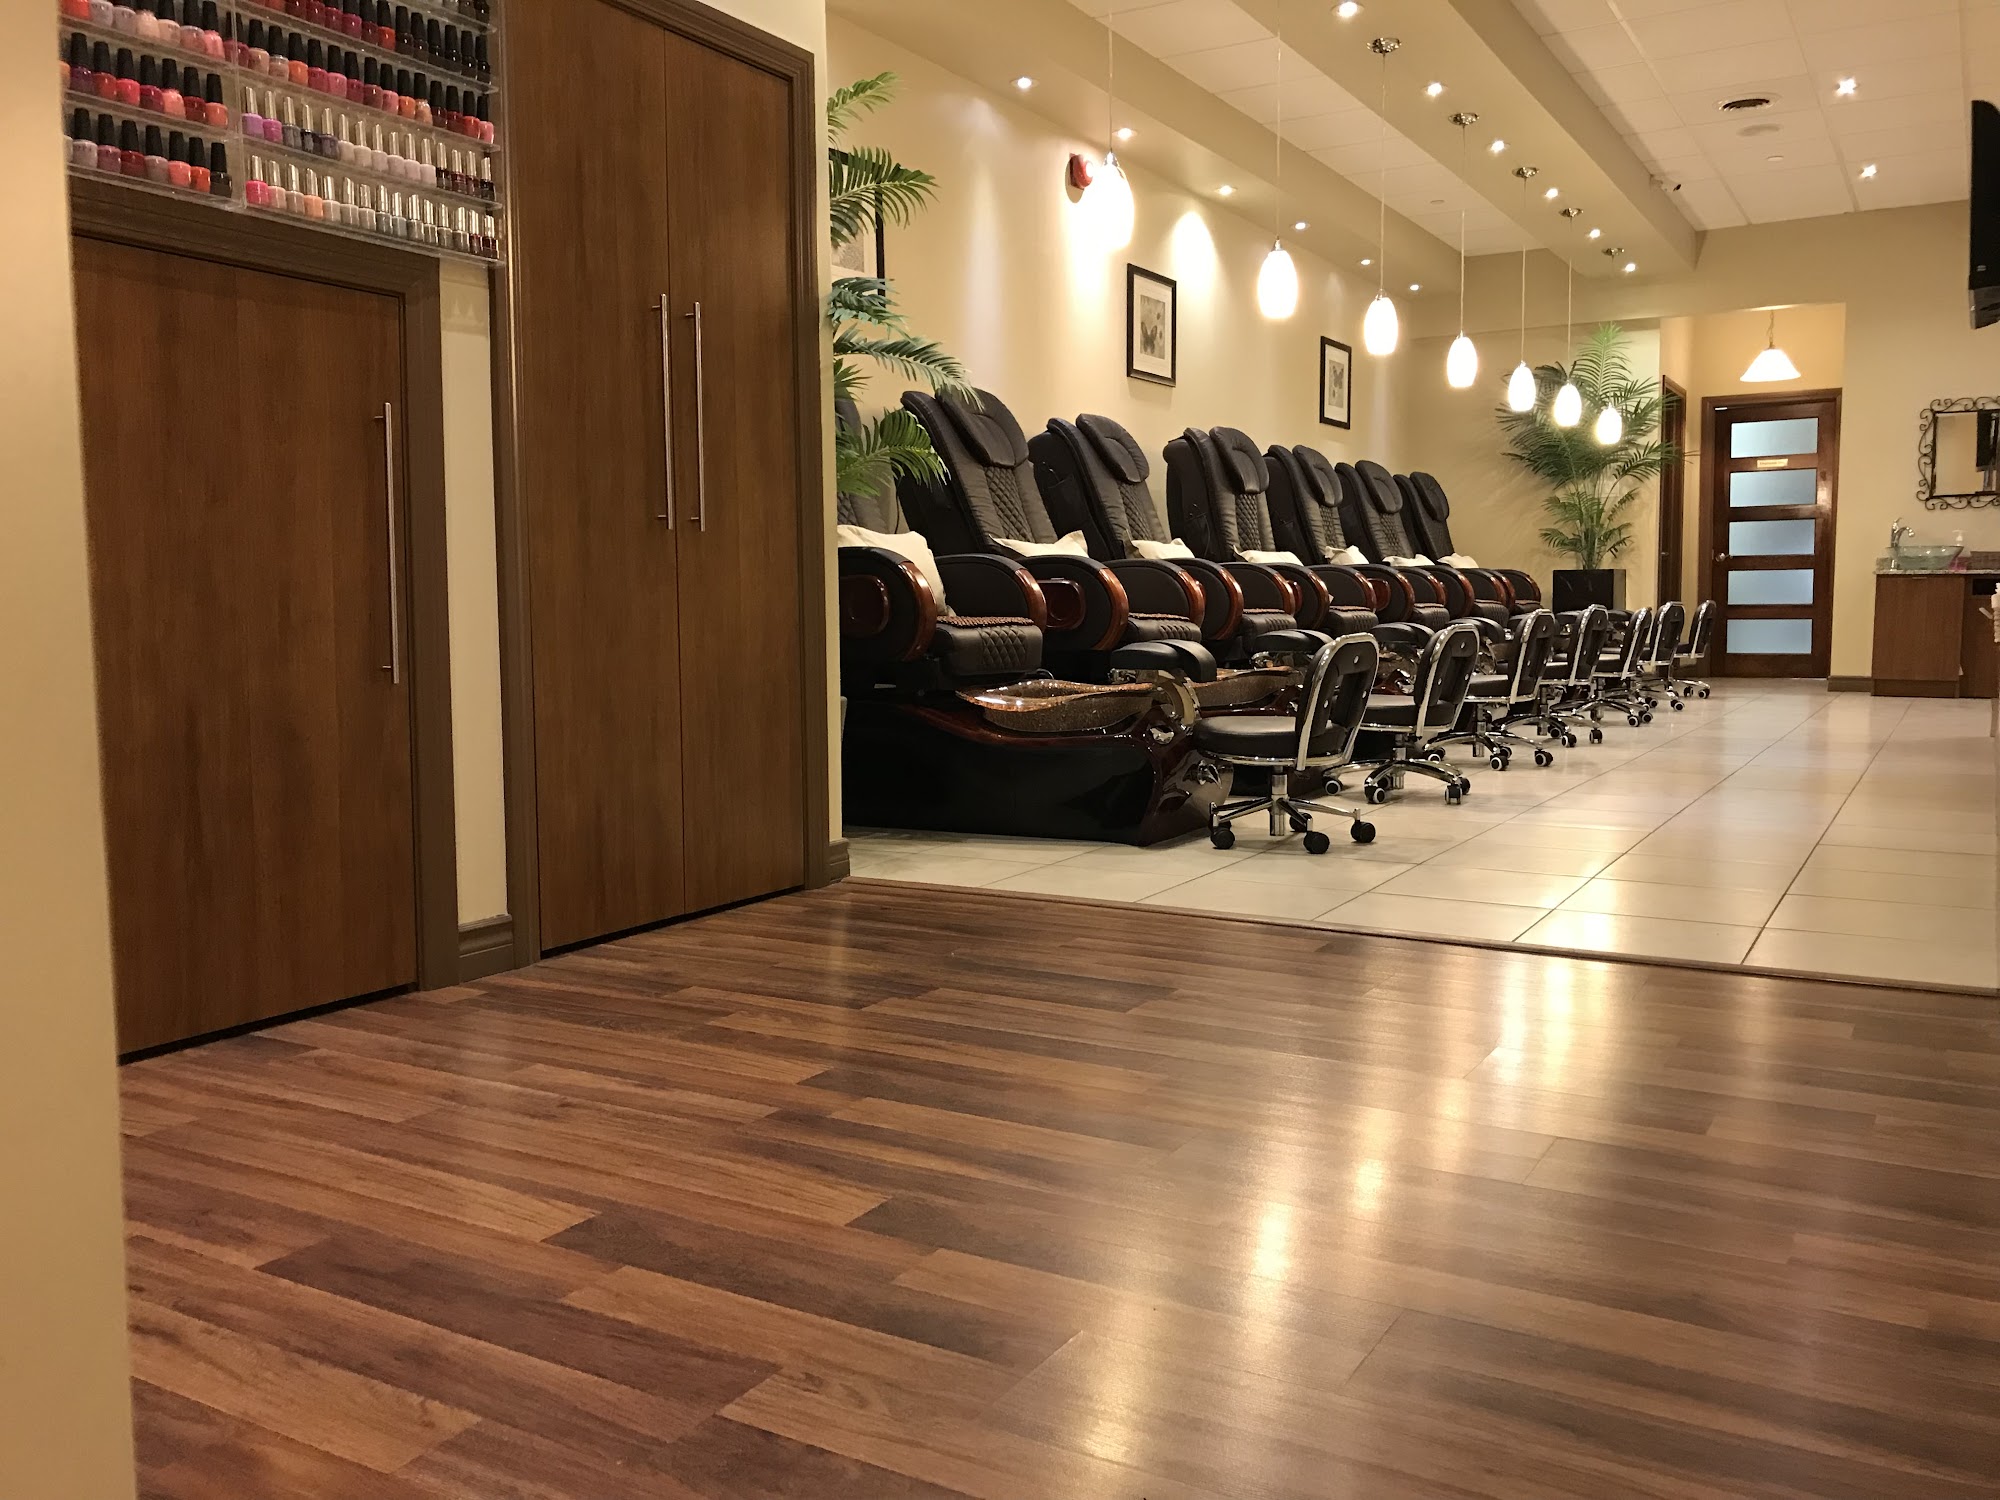 M&D Spa and Nails